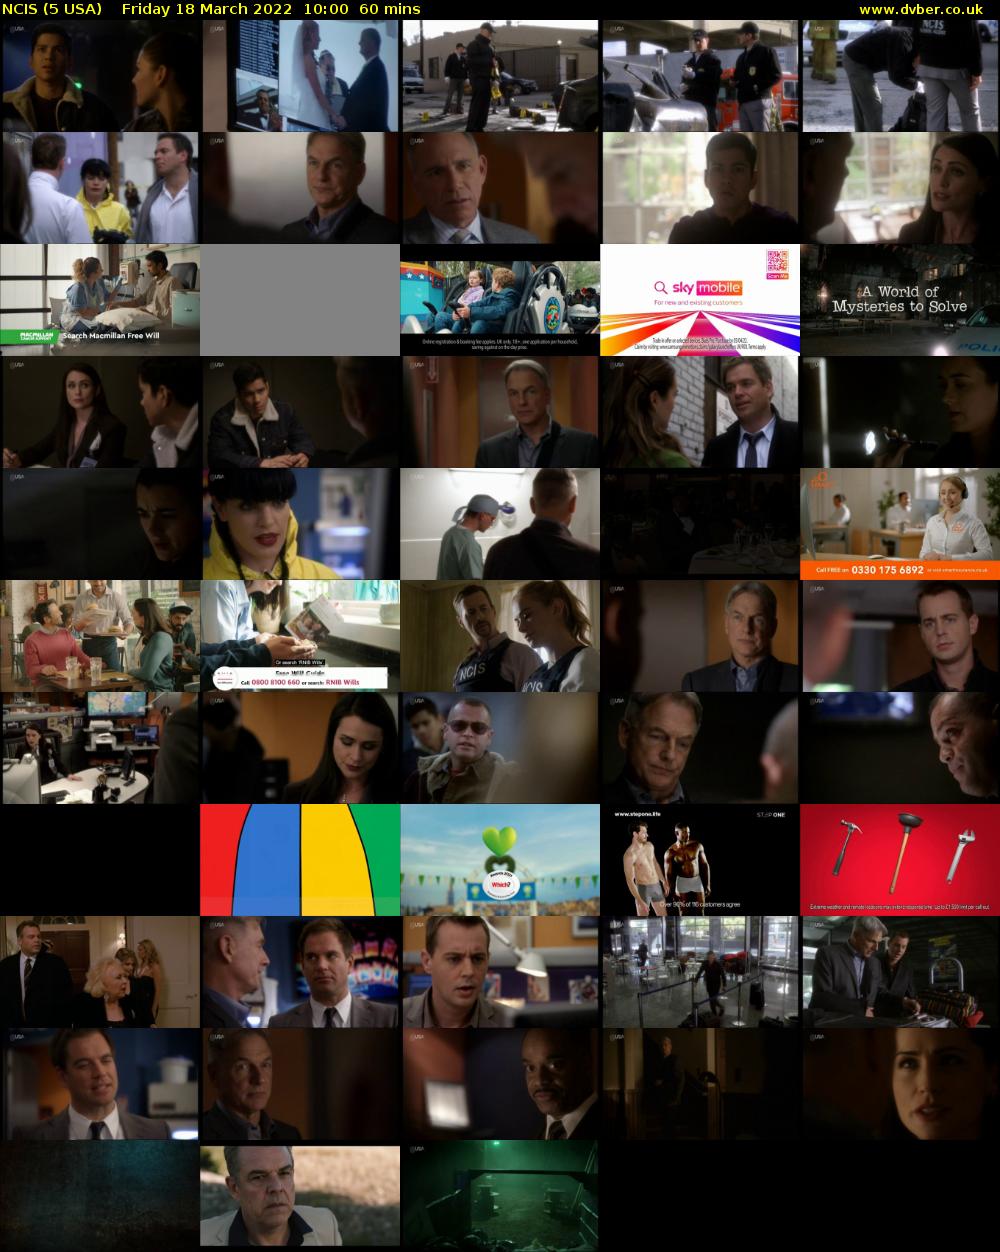 NCIS (5 USA) Friday 18 March 2022 10:00 - 11:00